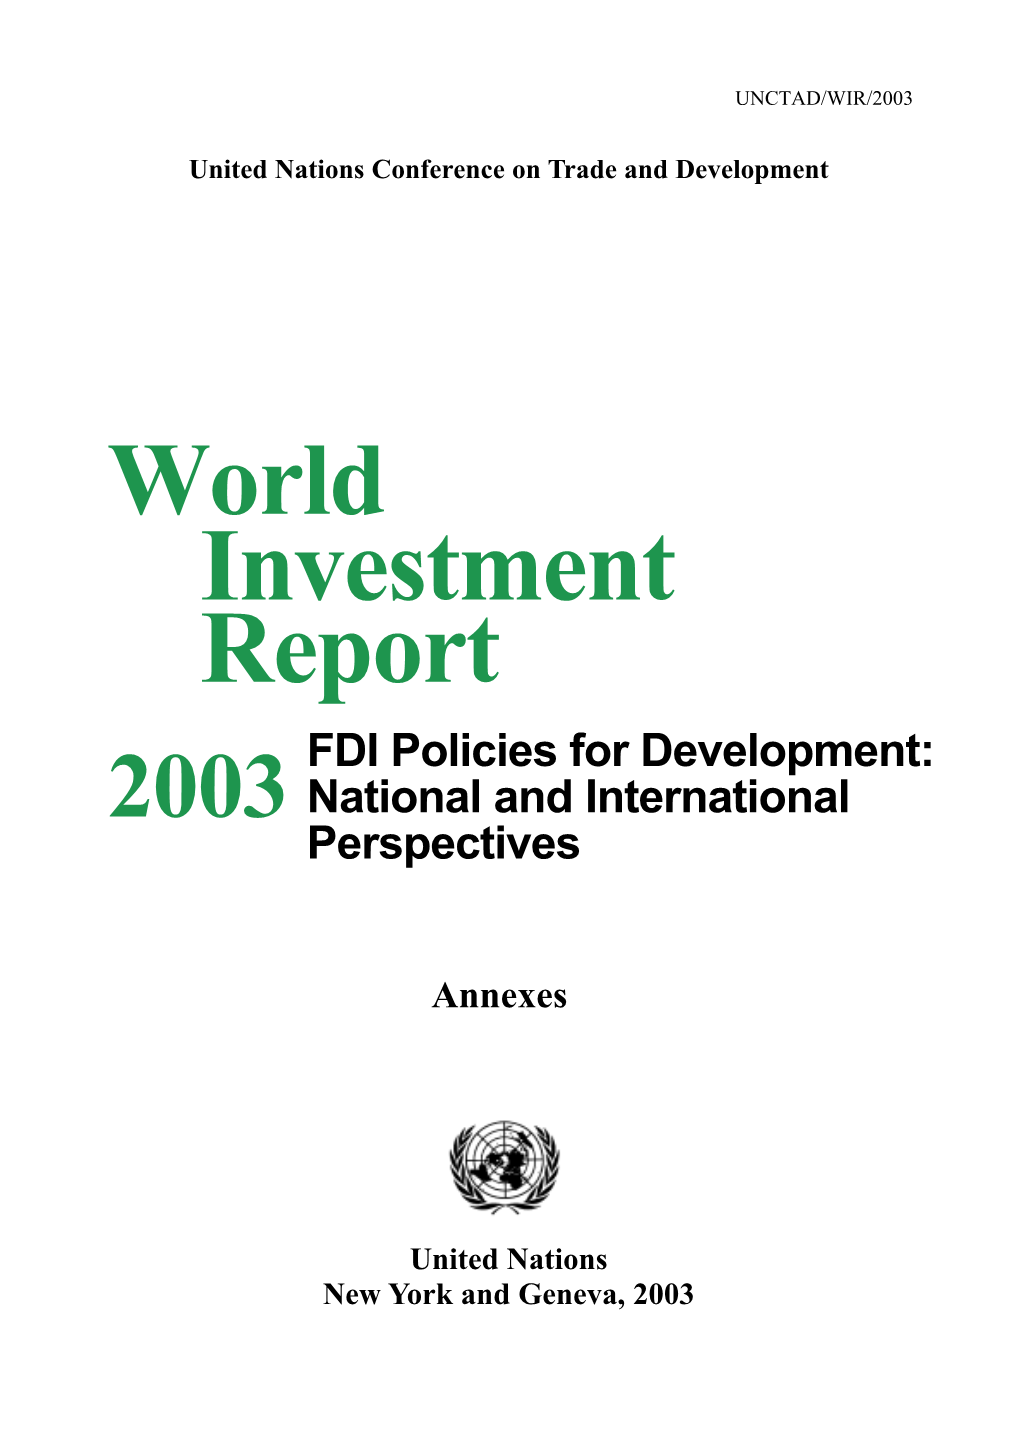 World Investment Report FDI Policies for Development: 2003 National and International Perspectives